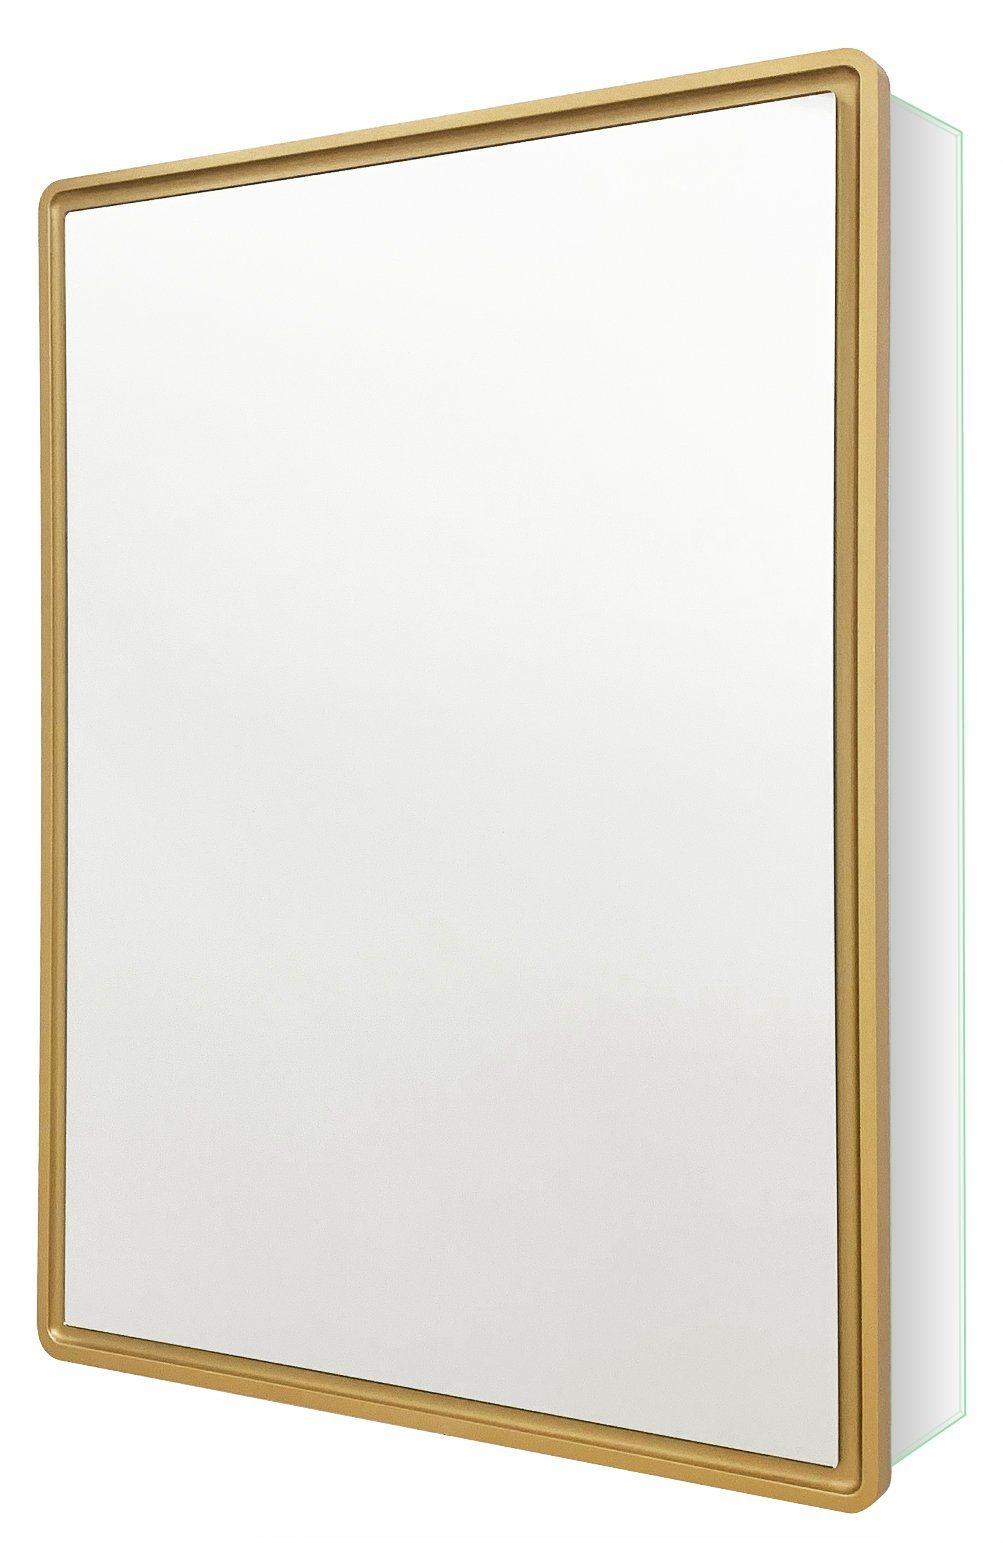 Bathroom Mirror Cabinet Gold Wood Framed Wall Aluminum Alloy Waterproof Medicine Cabinet Northern Europe Storage Hanging Cabinet with Single Door for Toilet Kit